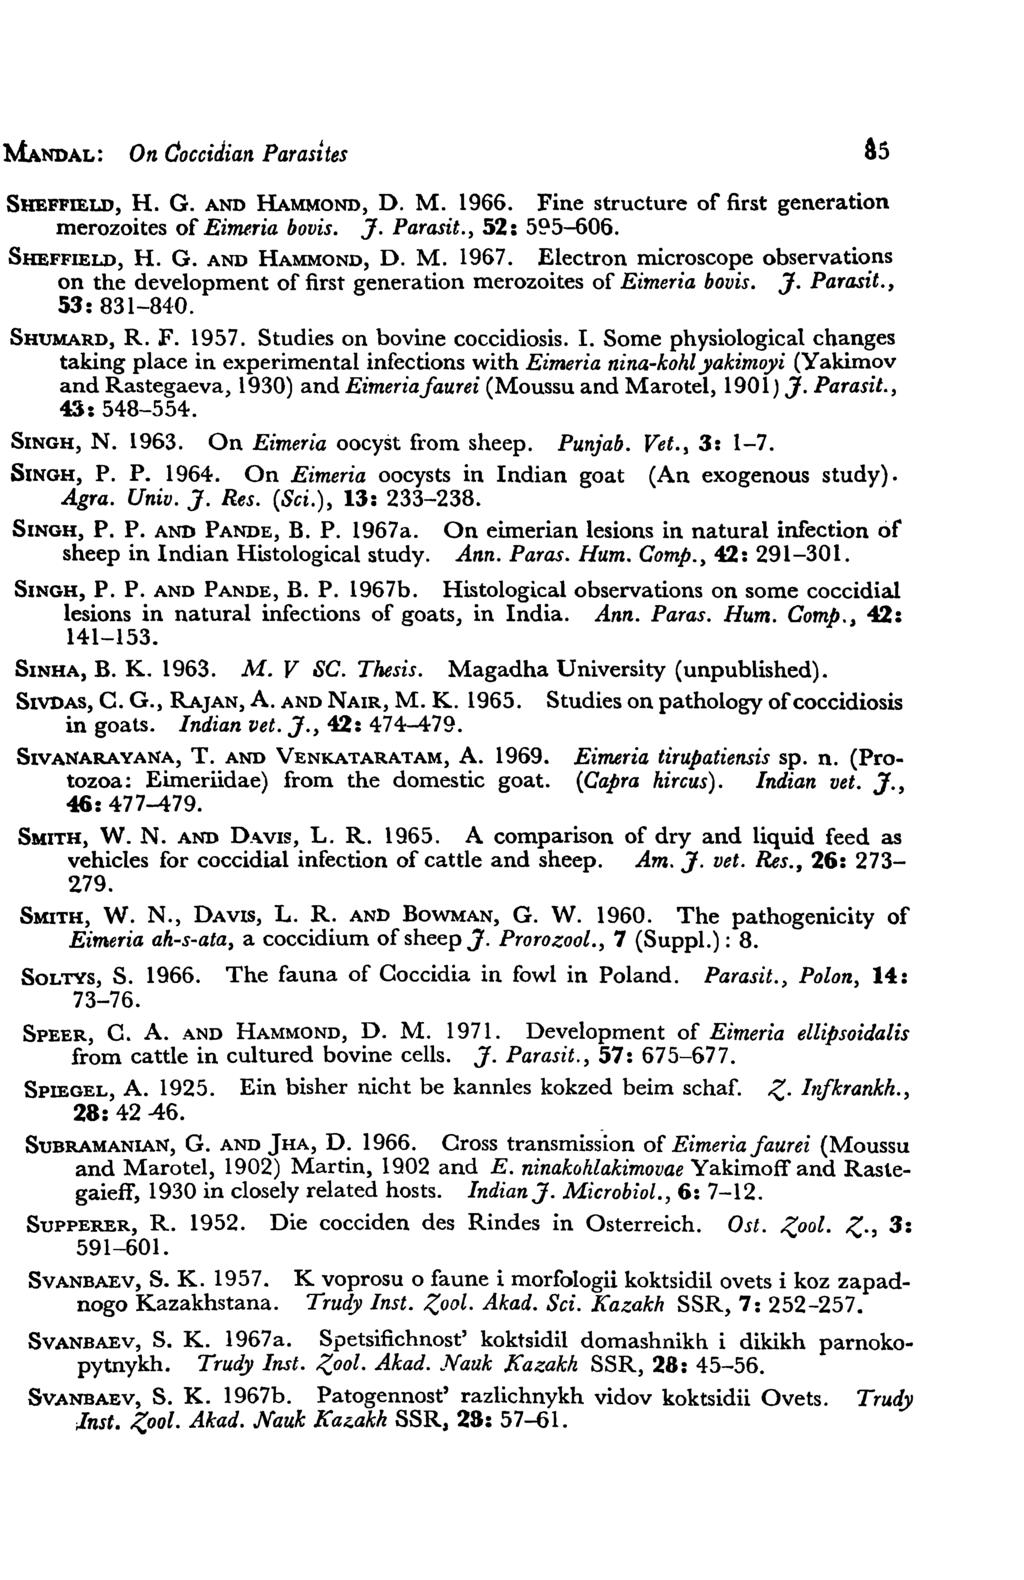 MANDAL: On coccidian Parasites As SHEFFIELD, H. G. AND HAMMOND, D. M. 1966. Fine structure of first generation merozoites of Eimeria bovis. J. Parasit., 52: 5~5-606. SHEFFIELD, H. G. AND HAMMOND, D. M. 1967.